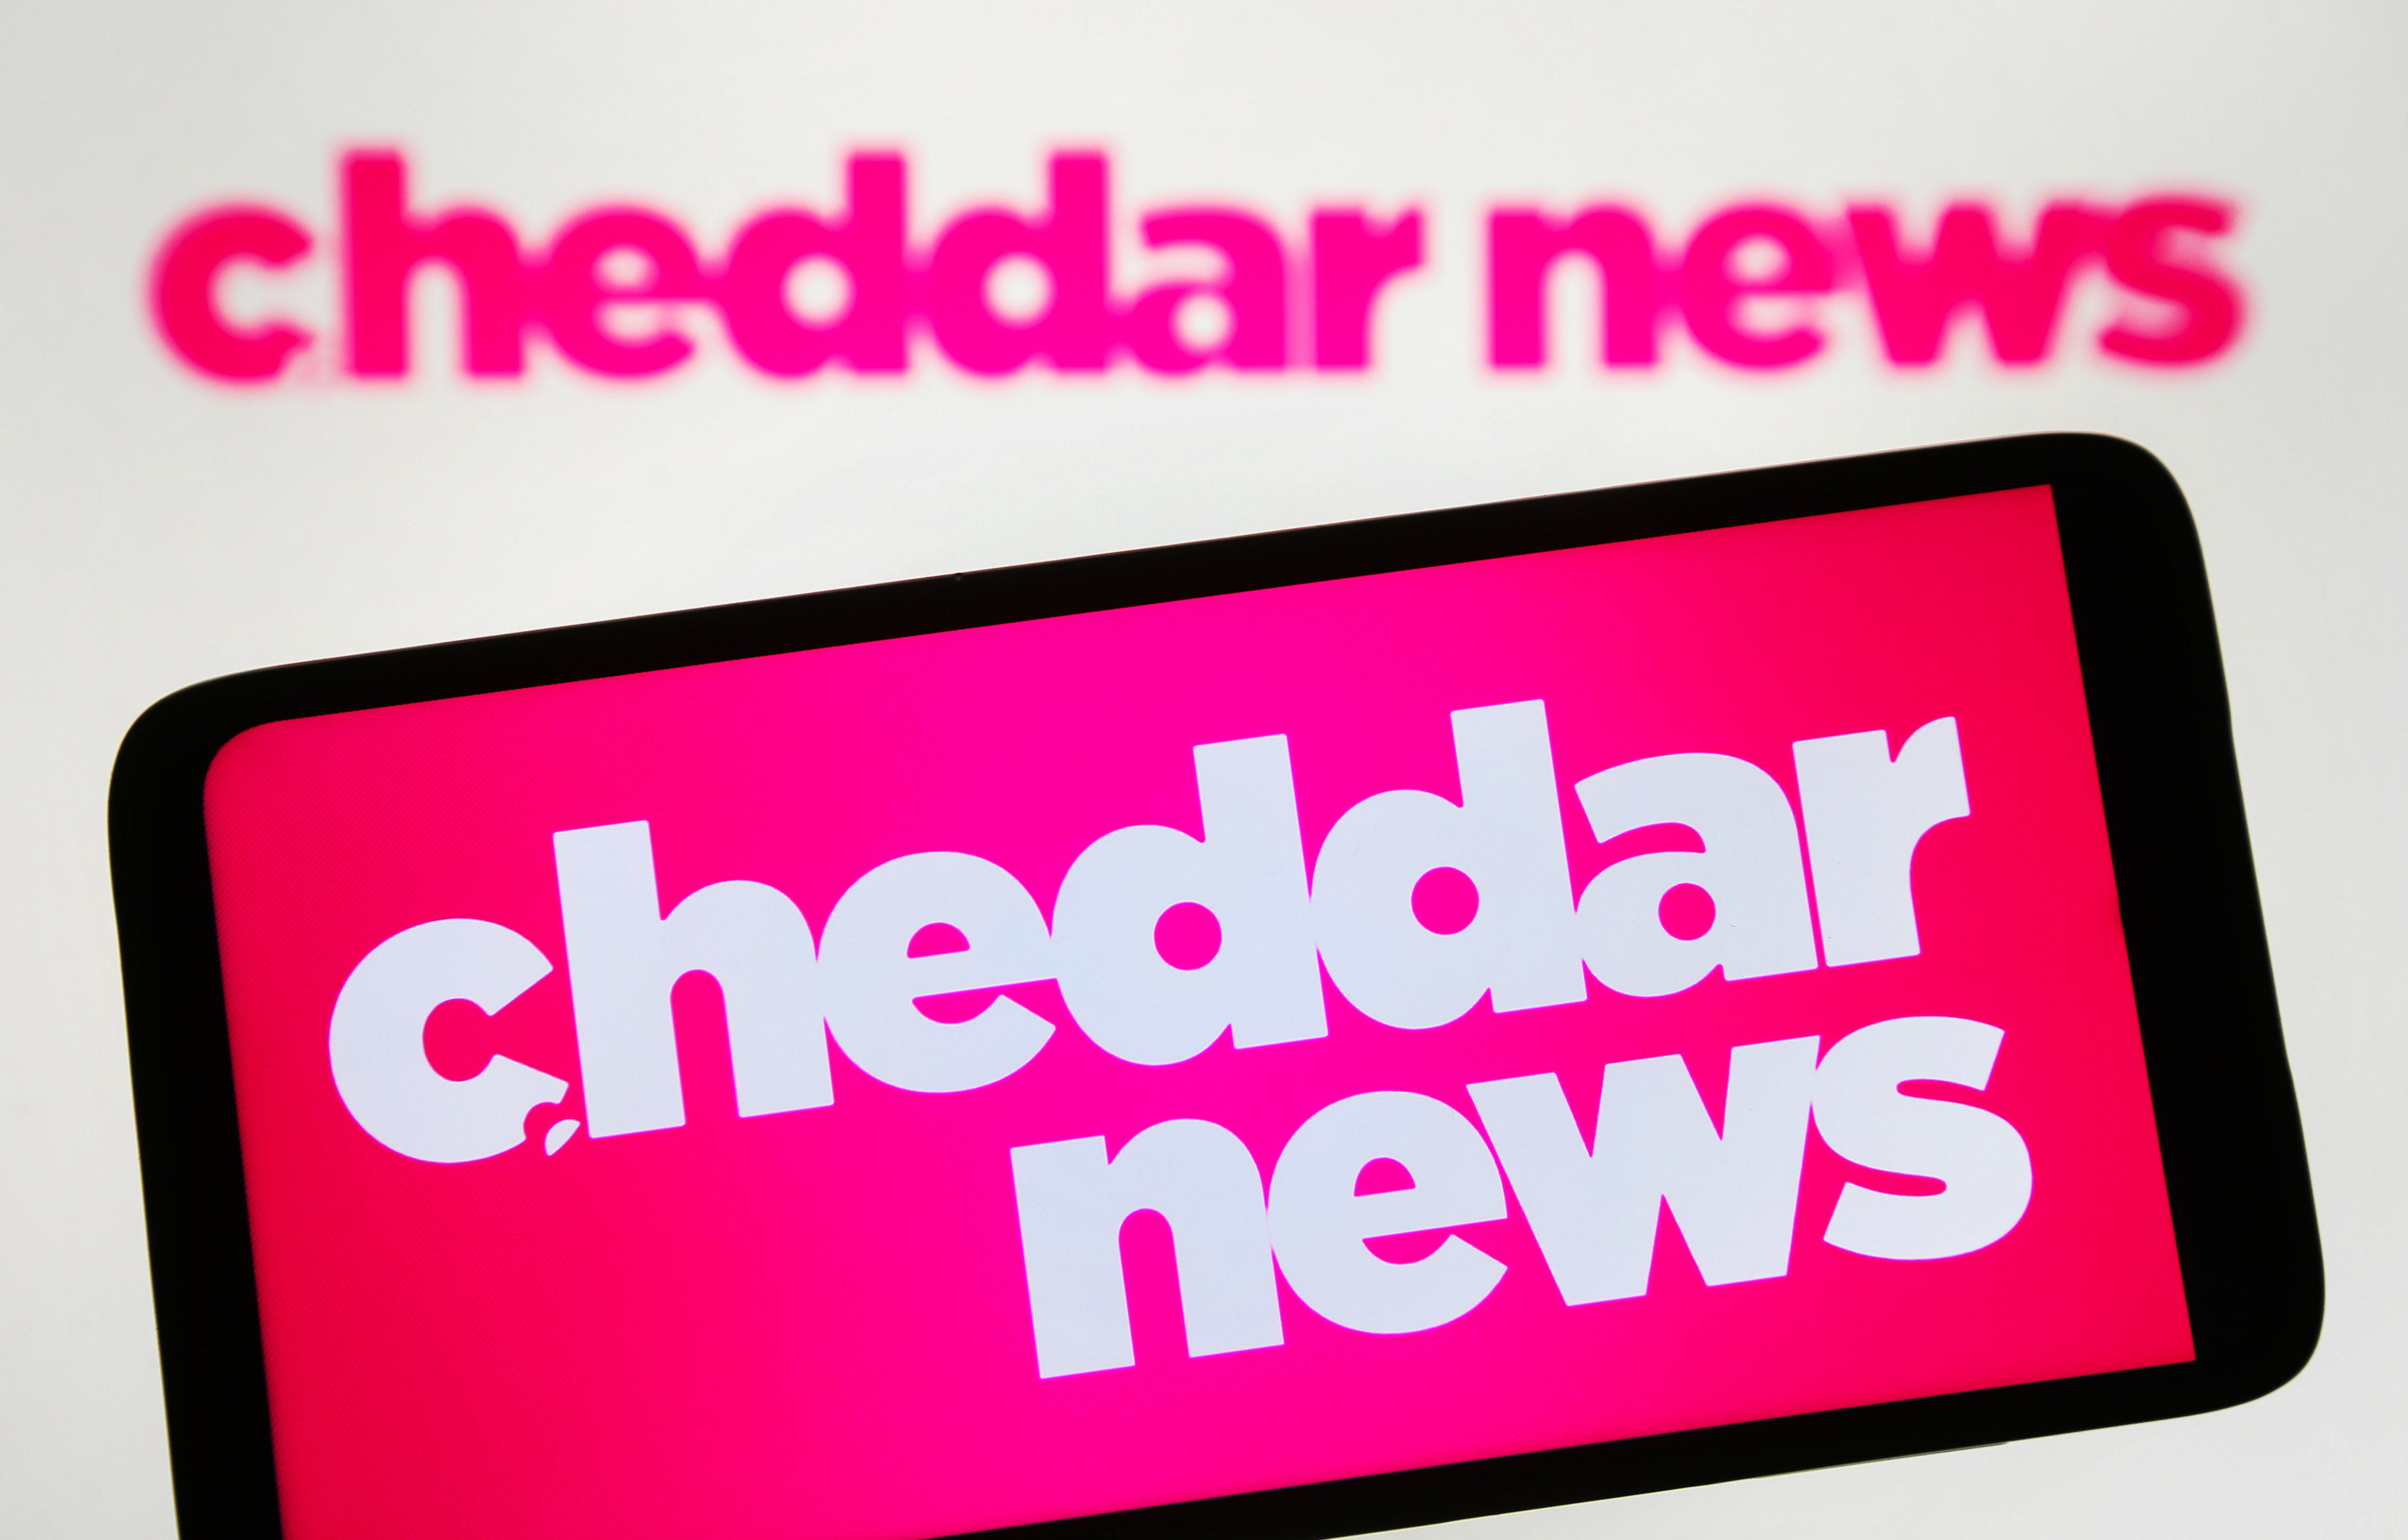 Cheddar News has been sold by Altice USA to media company Archetype